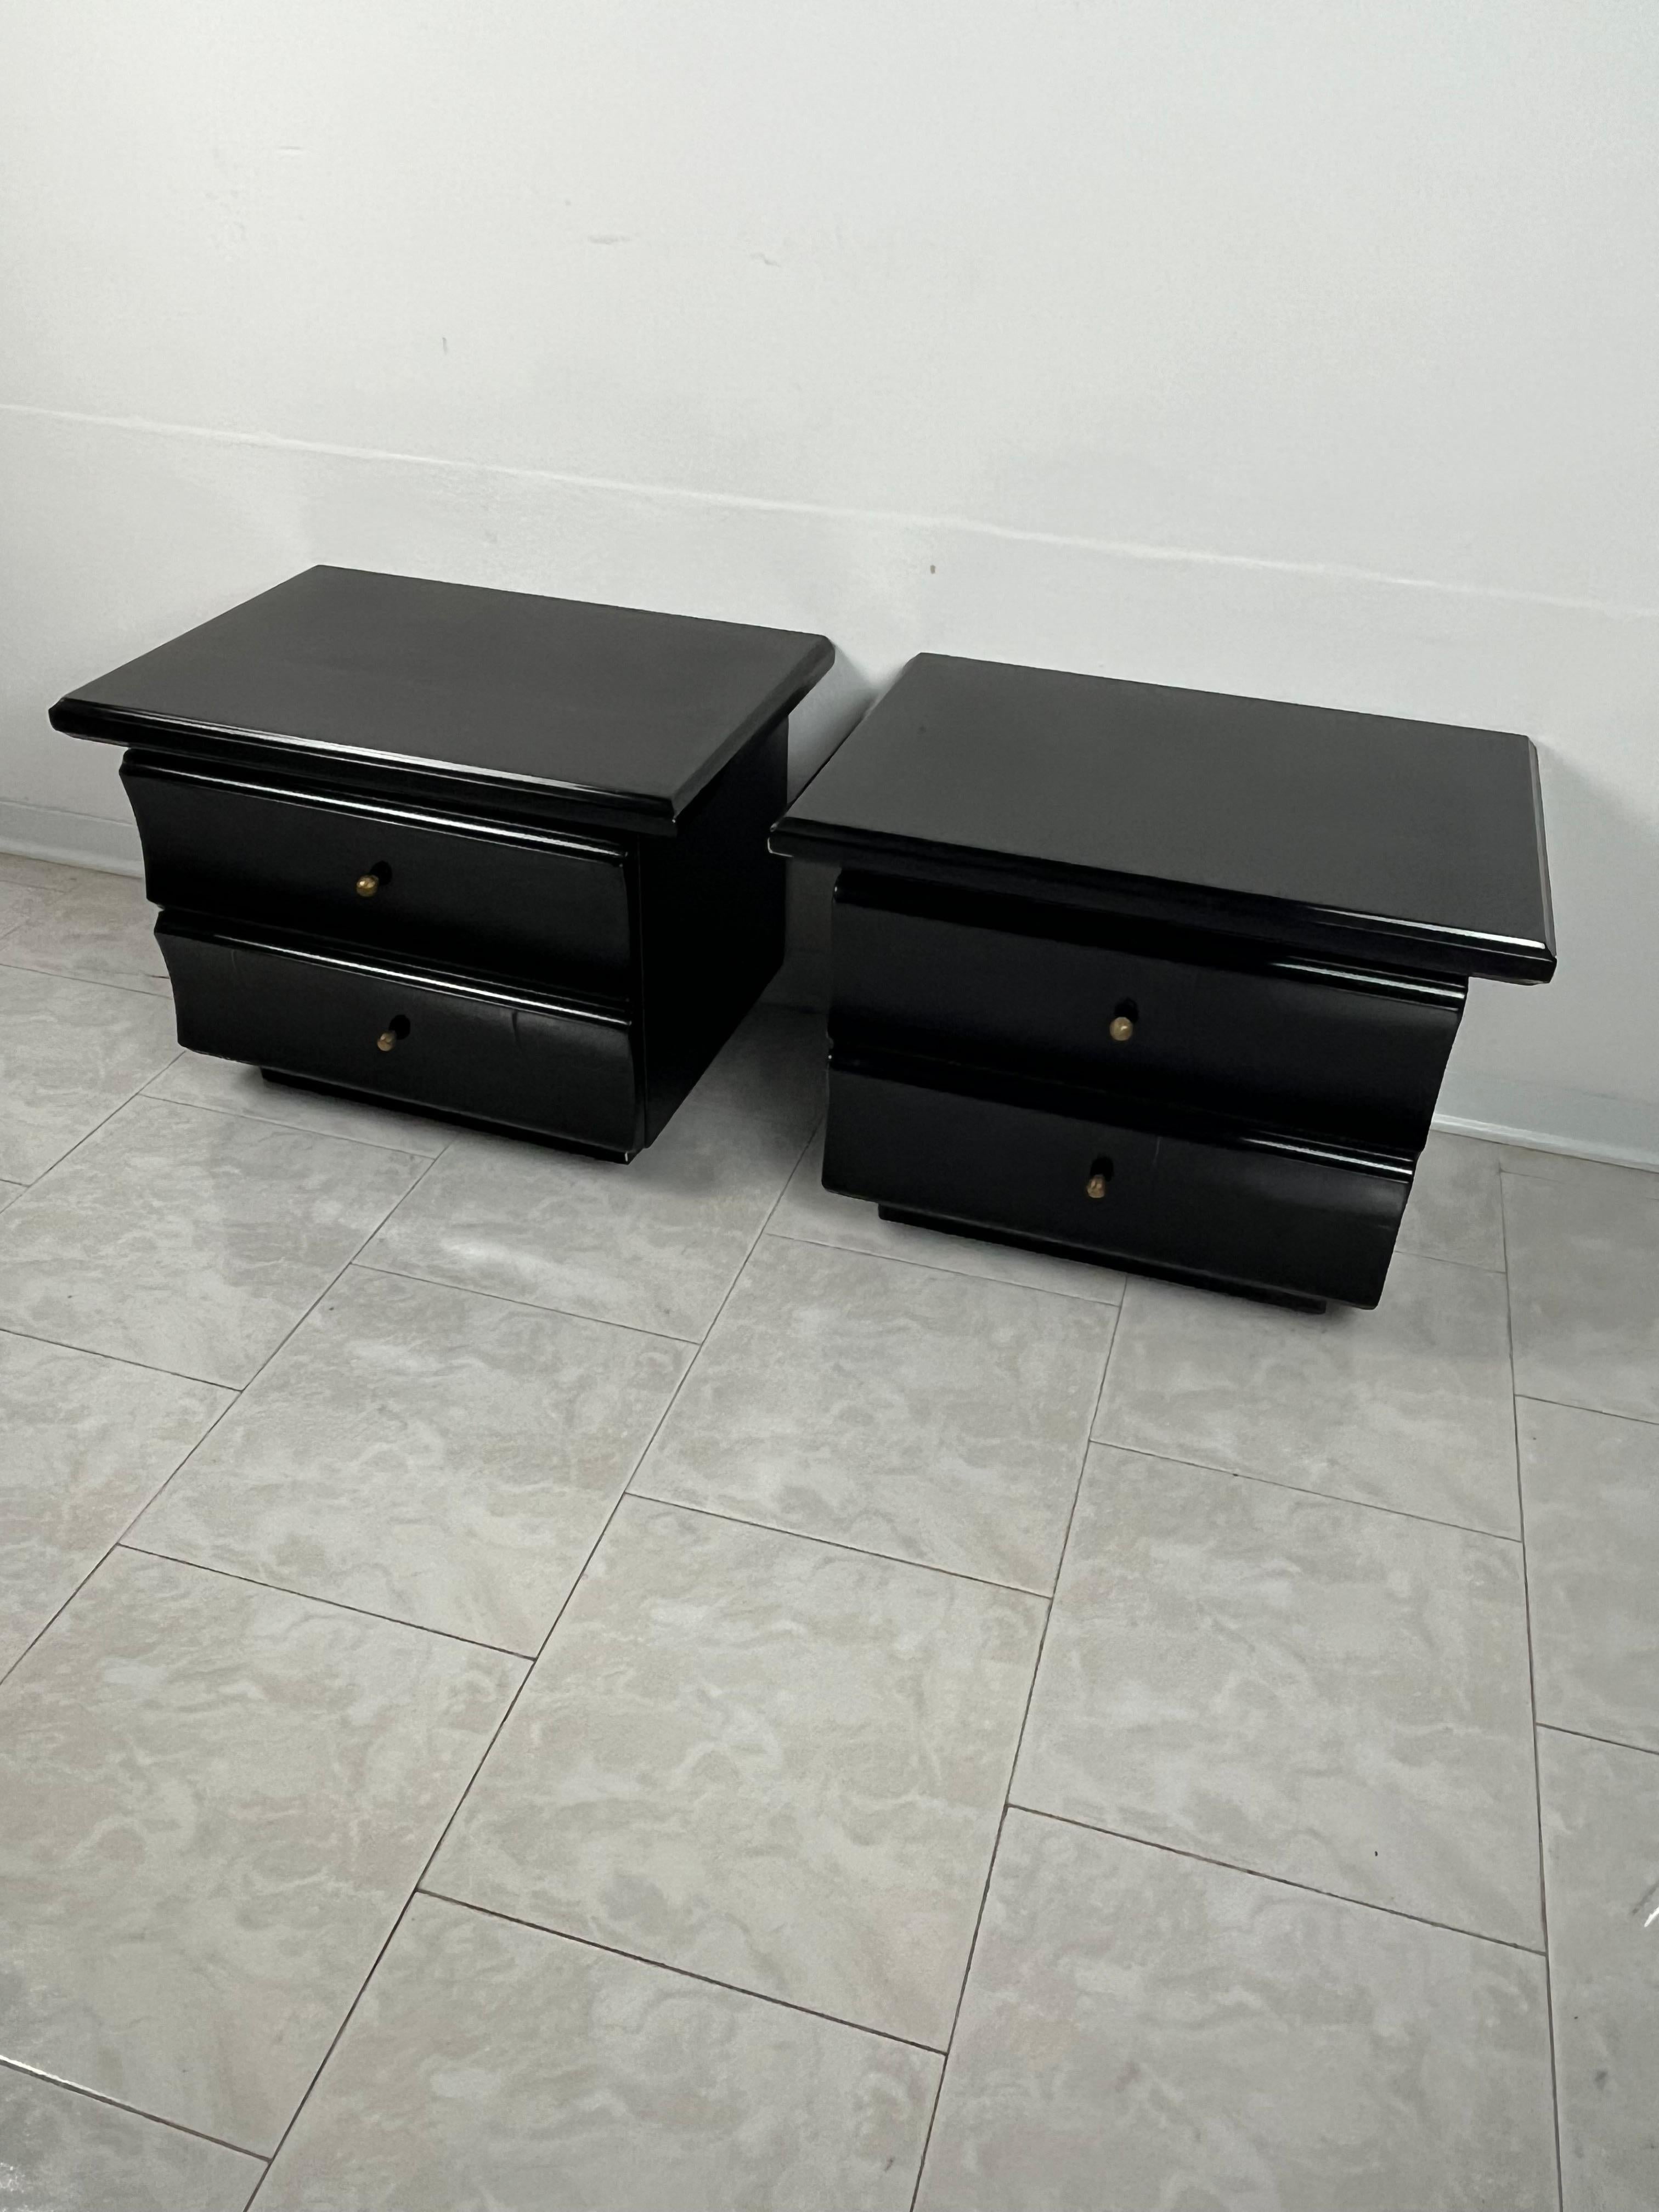 Pair of Italian design bedside tables, Italy, 1970s
Delightful bedside tables in black lacquered wood and brass knobs.
Good condition with small signs of aging.